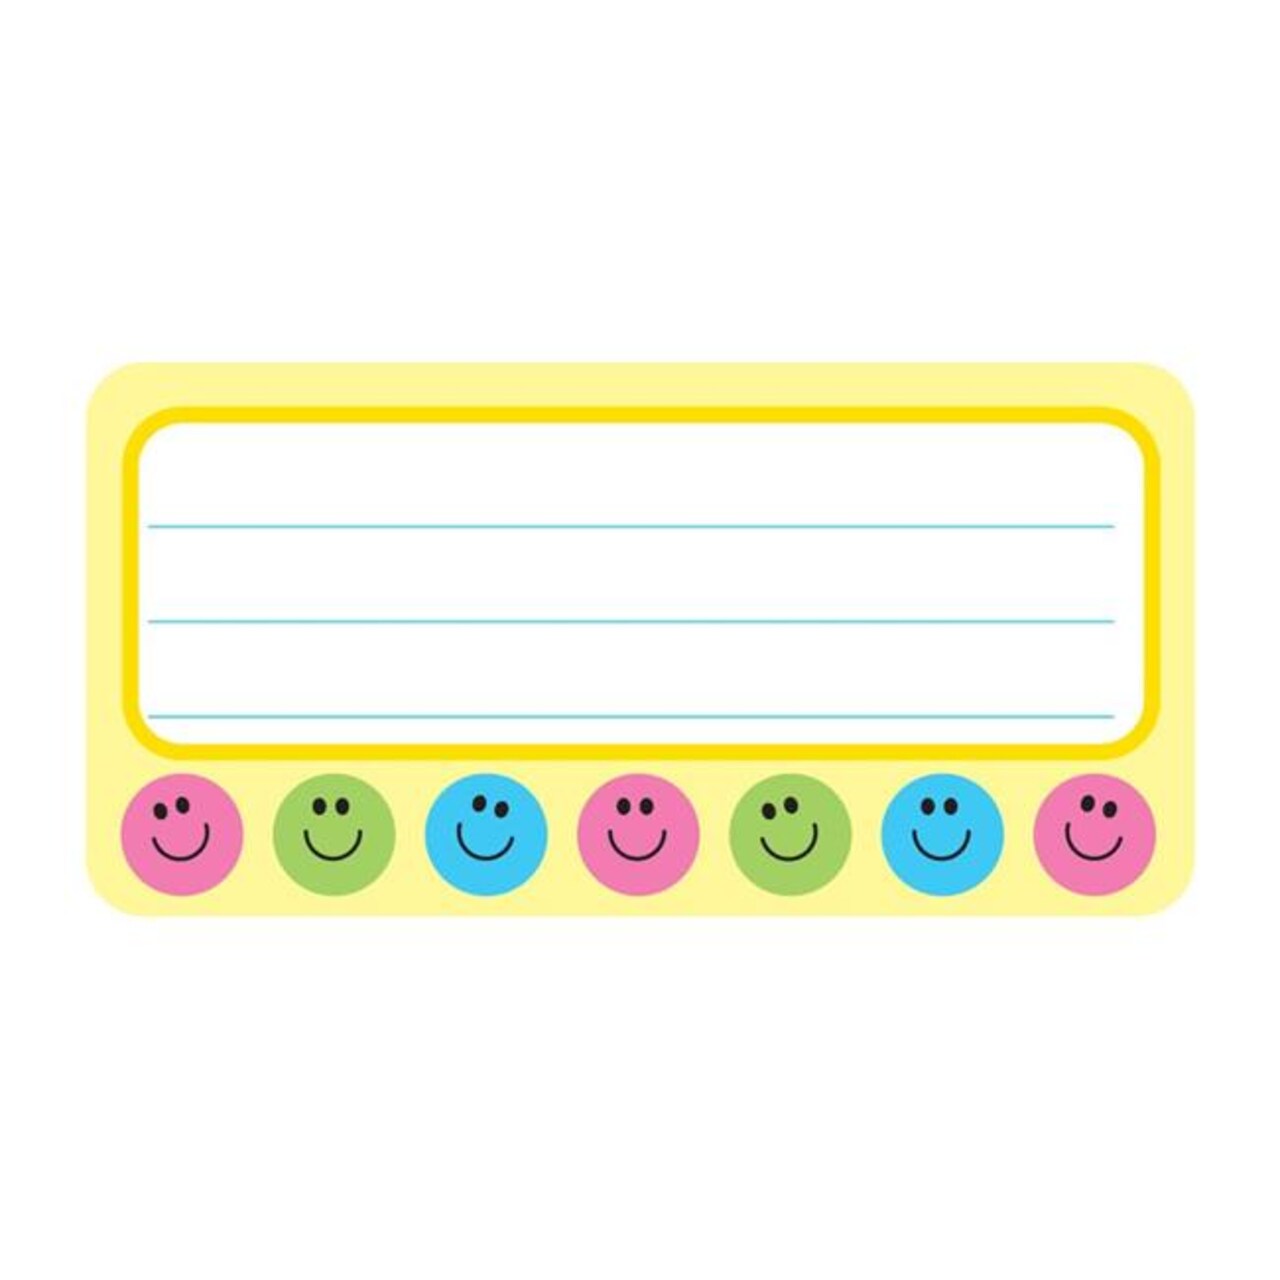 Creative Shapes Etc SE-0808 4.5 x 4 in. Smile Nametag - 36 Count